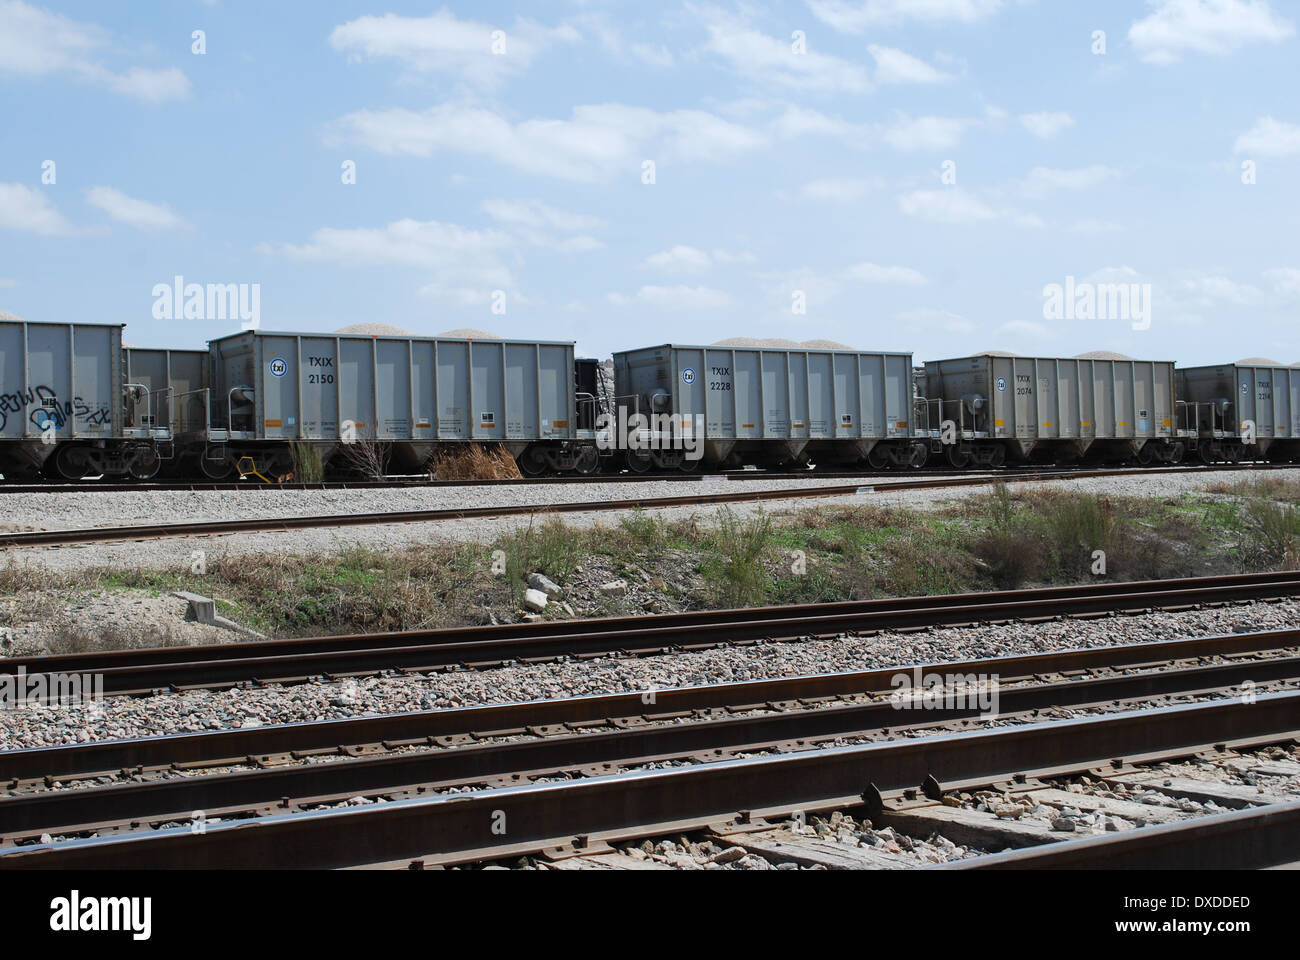 Texas Industries to merge with Martin Marietta Corporation in second quarter 2014. The TXI rail cars are being loaded  here. Stock Photo